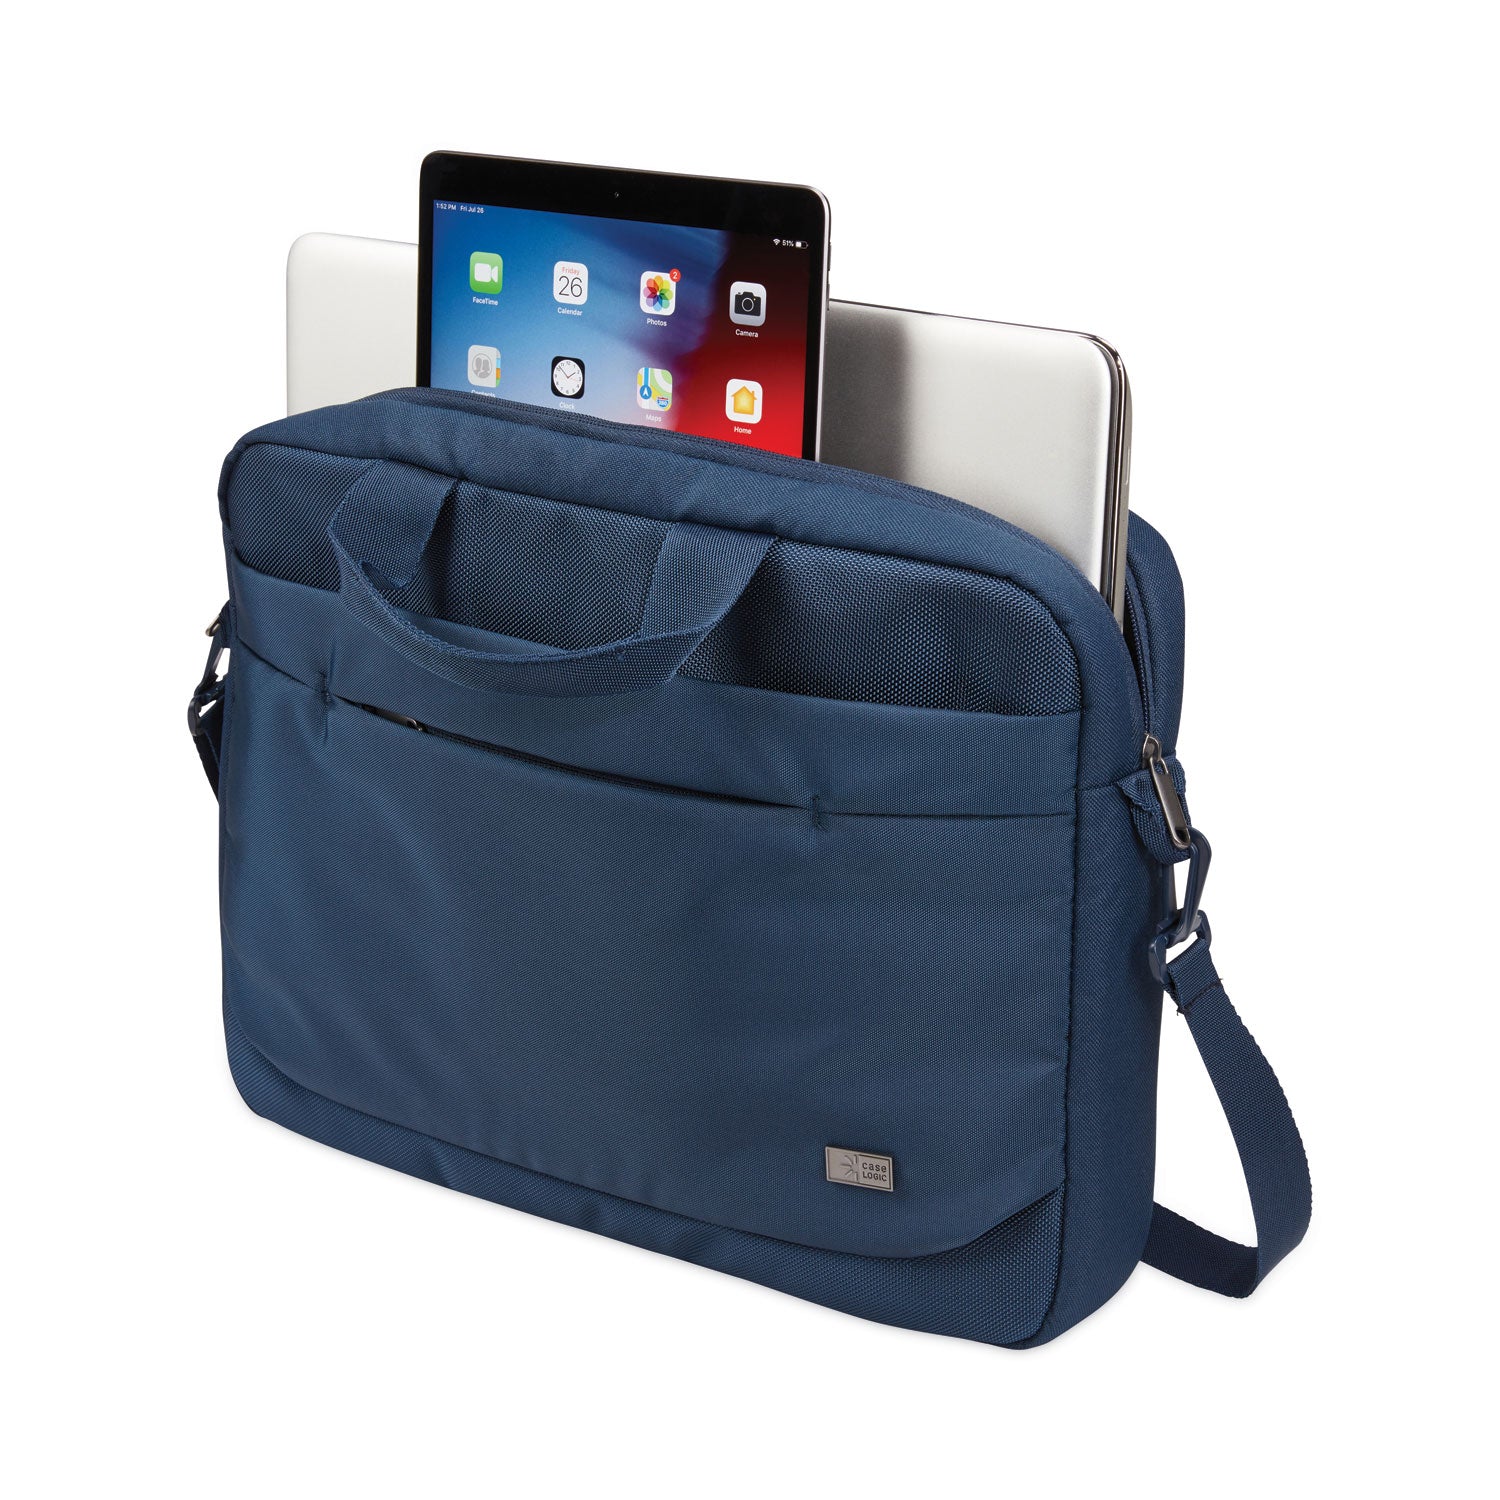 advantage-laptop-attache-fits-devices-up-to-14-polyester-146-x-28-x-13-dark-blue_clg3203987 - 6